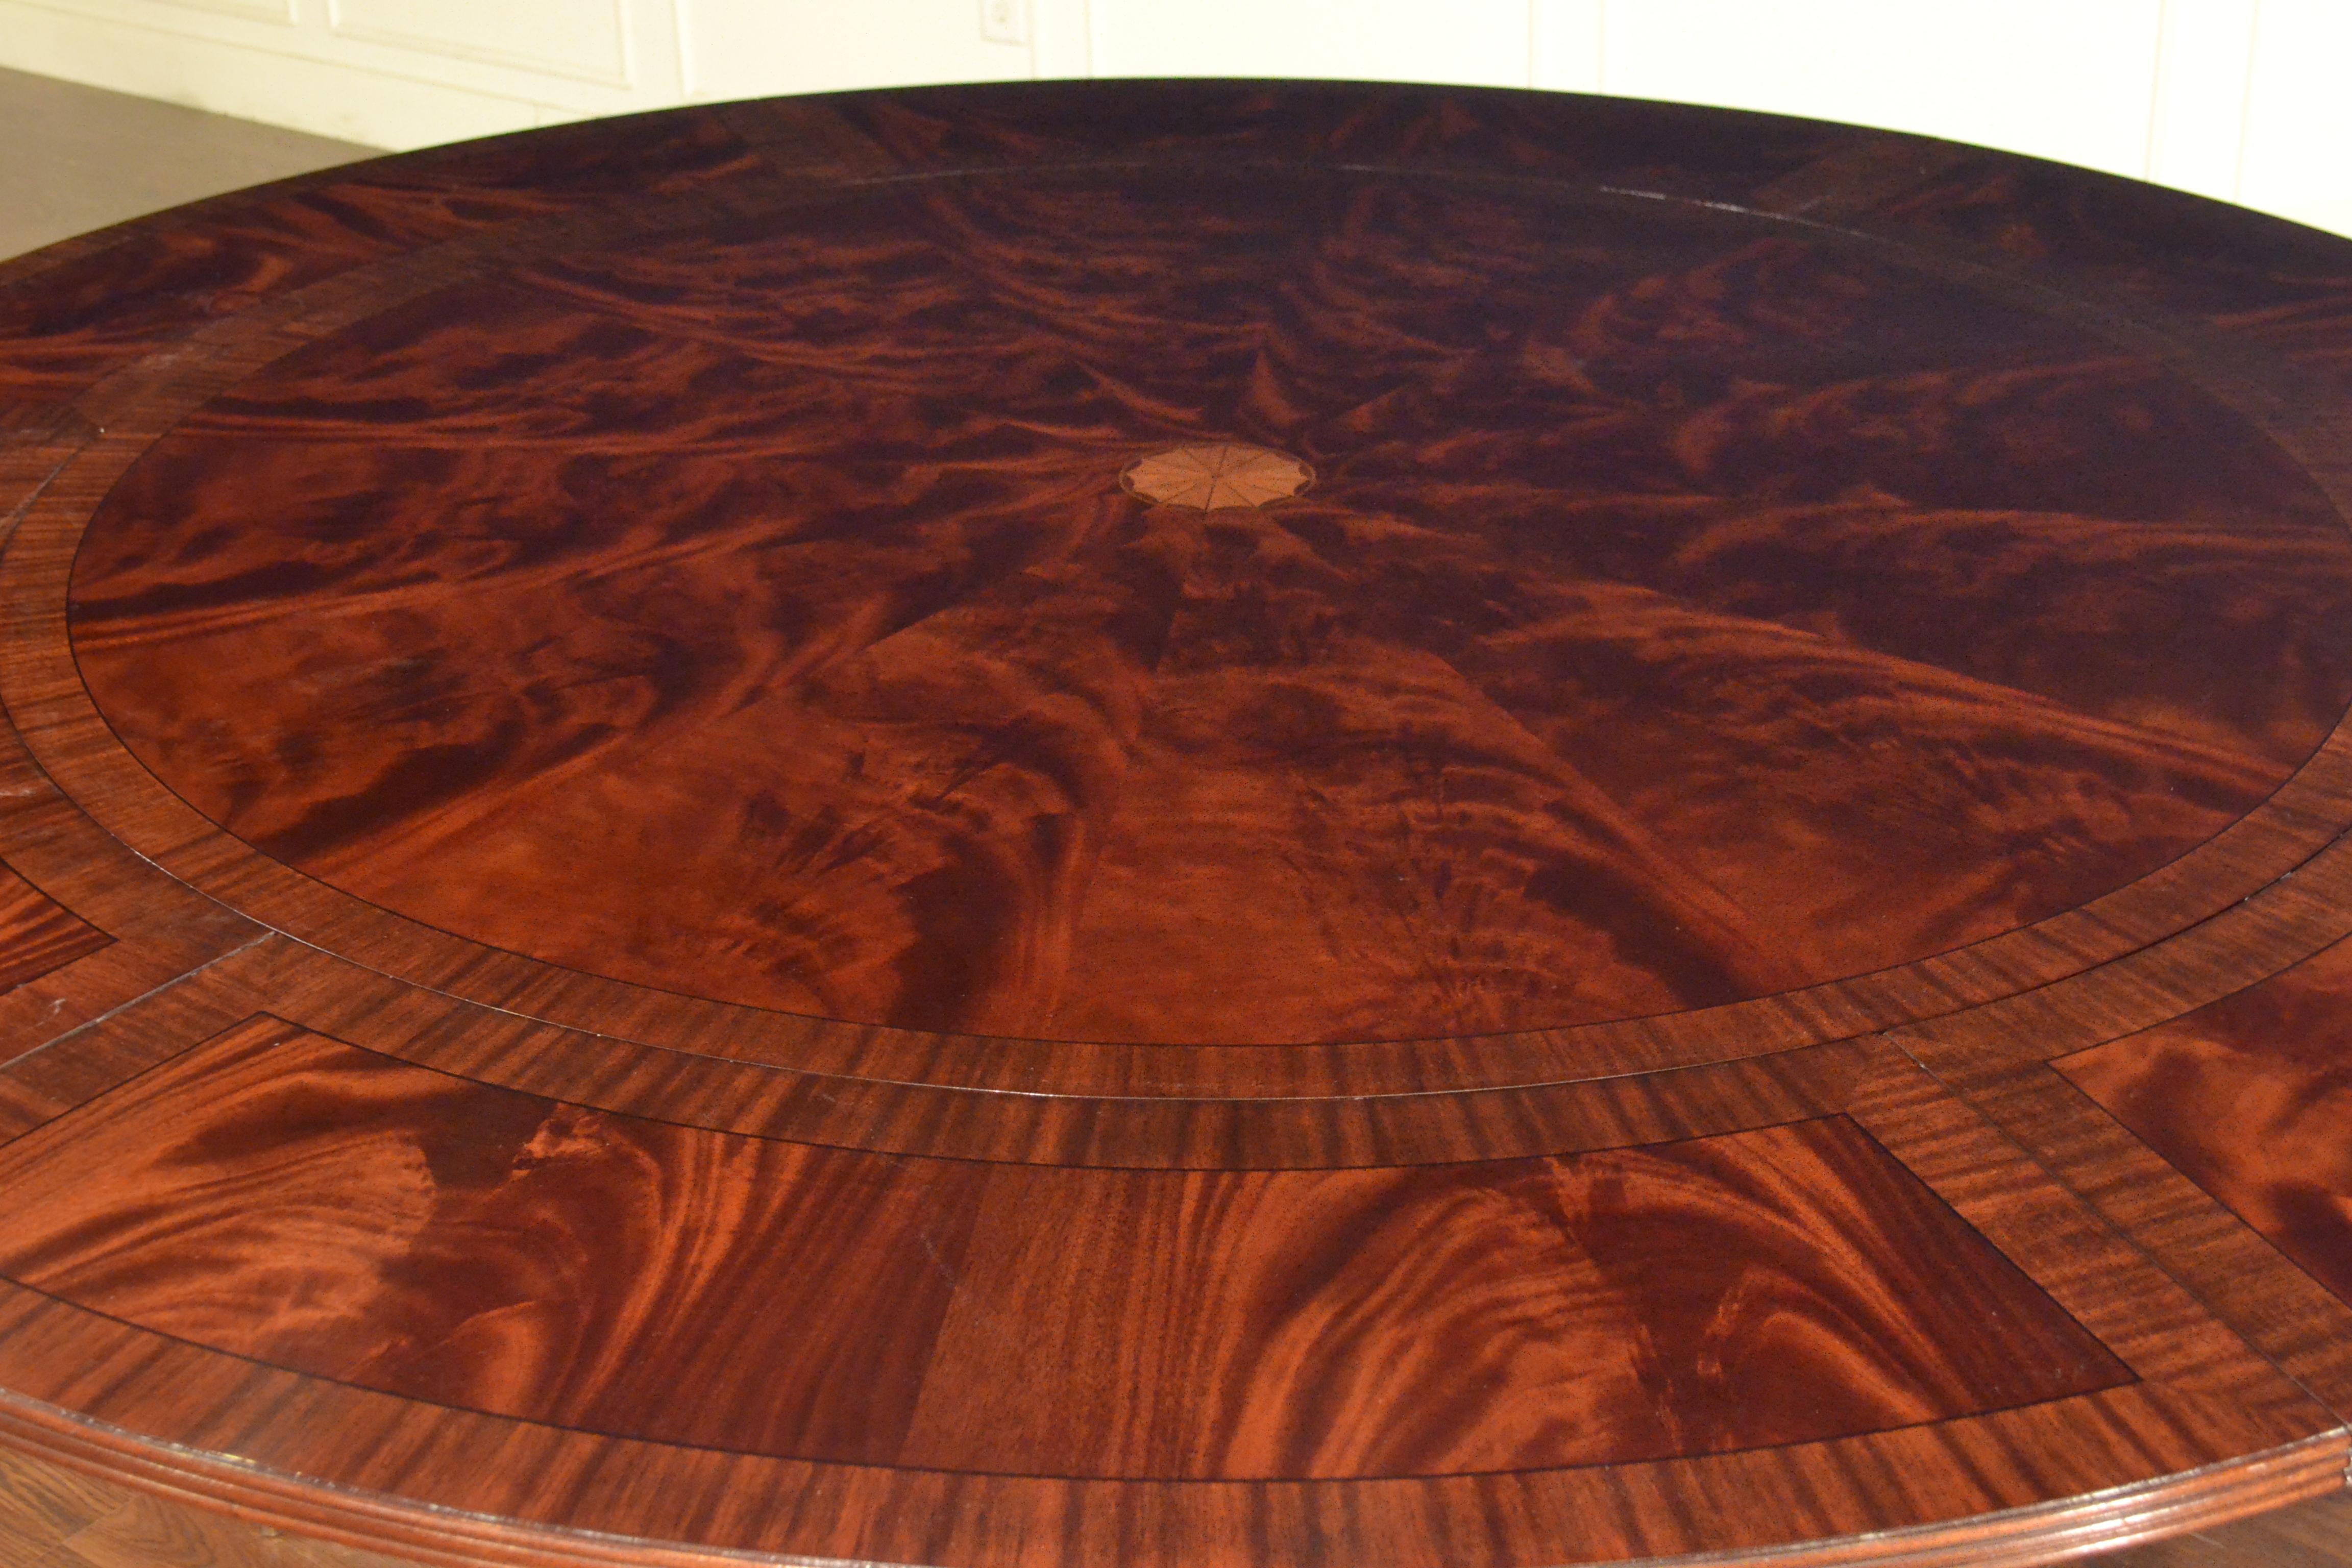 This is made-to-order round traditional mahogany dining table made by Leighton Hall. It features field of radial cut West African swirly crotch mahogany and borders of straight grain mahogany. There are inlays of ebony and white maple which separate